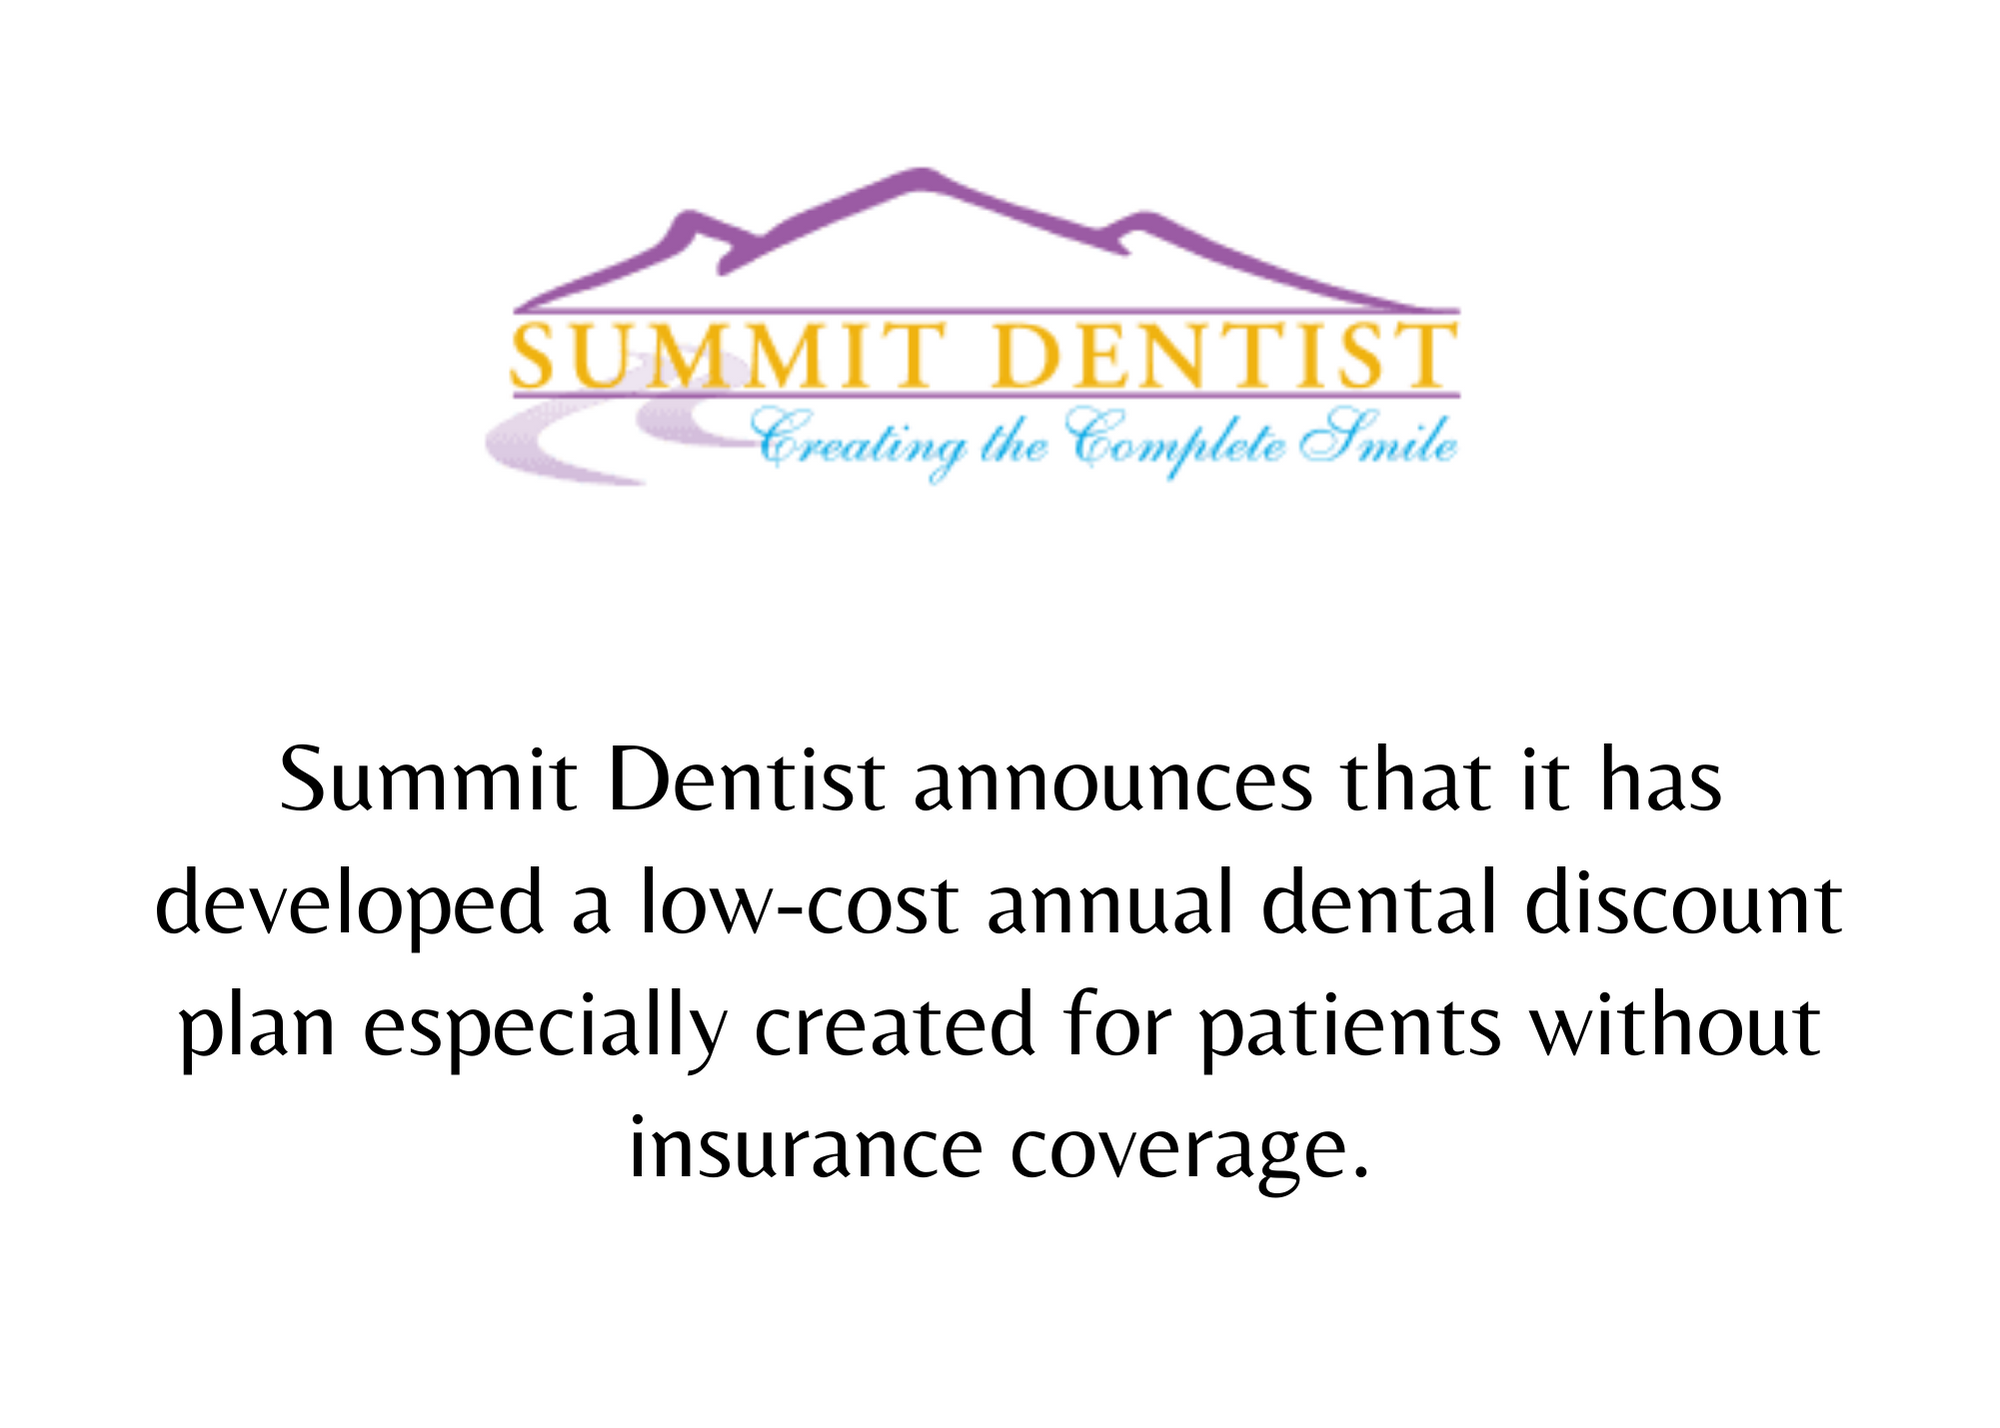 Summit Dentist, Thursday, May 19, 2022, Press release picture